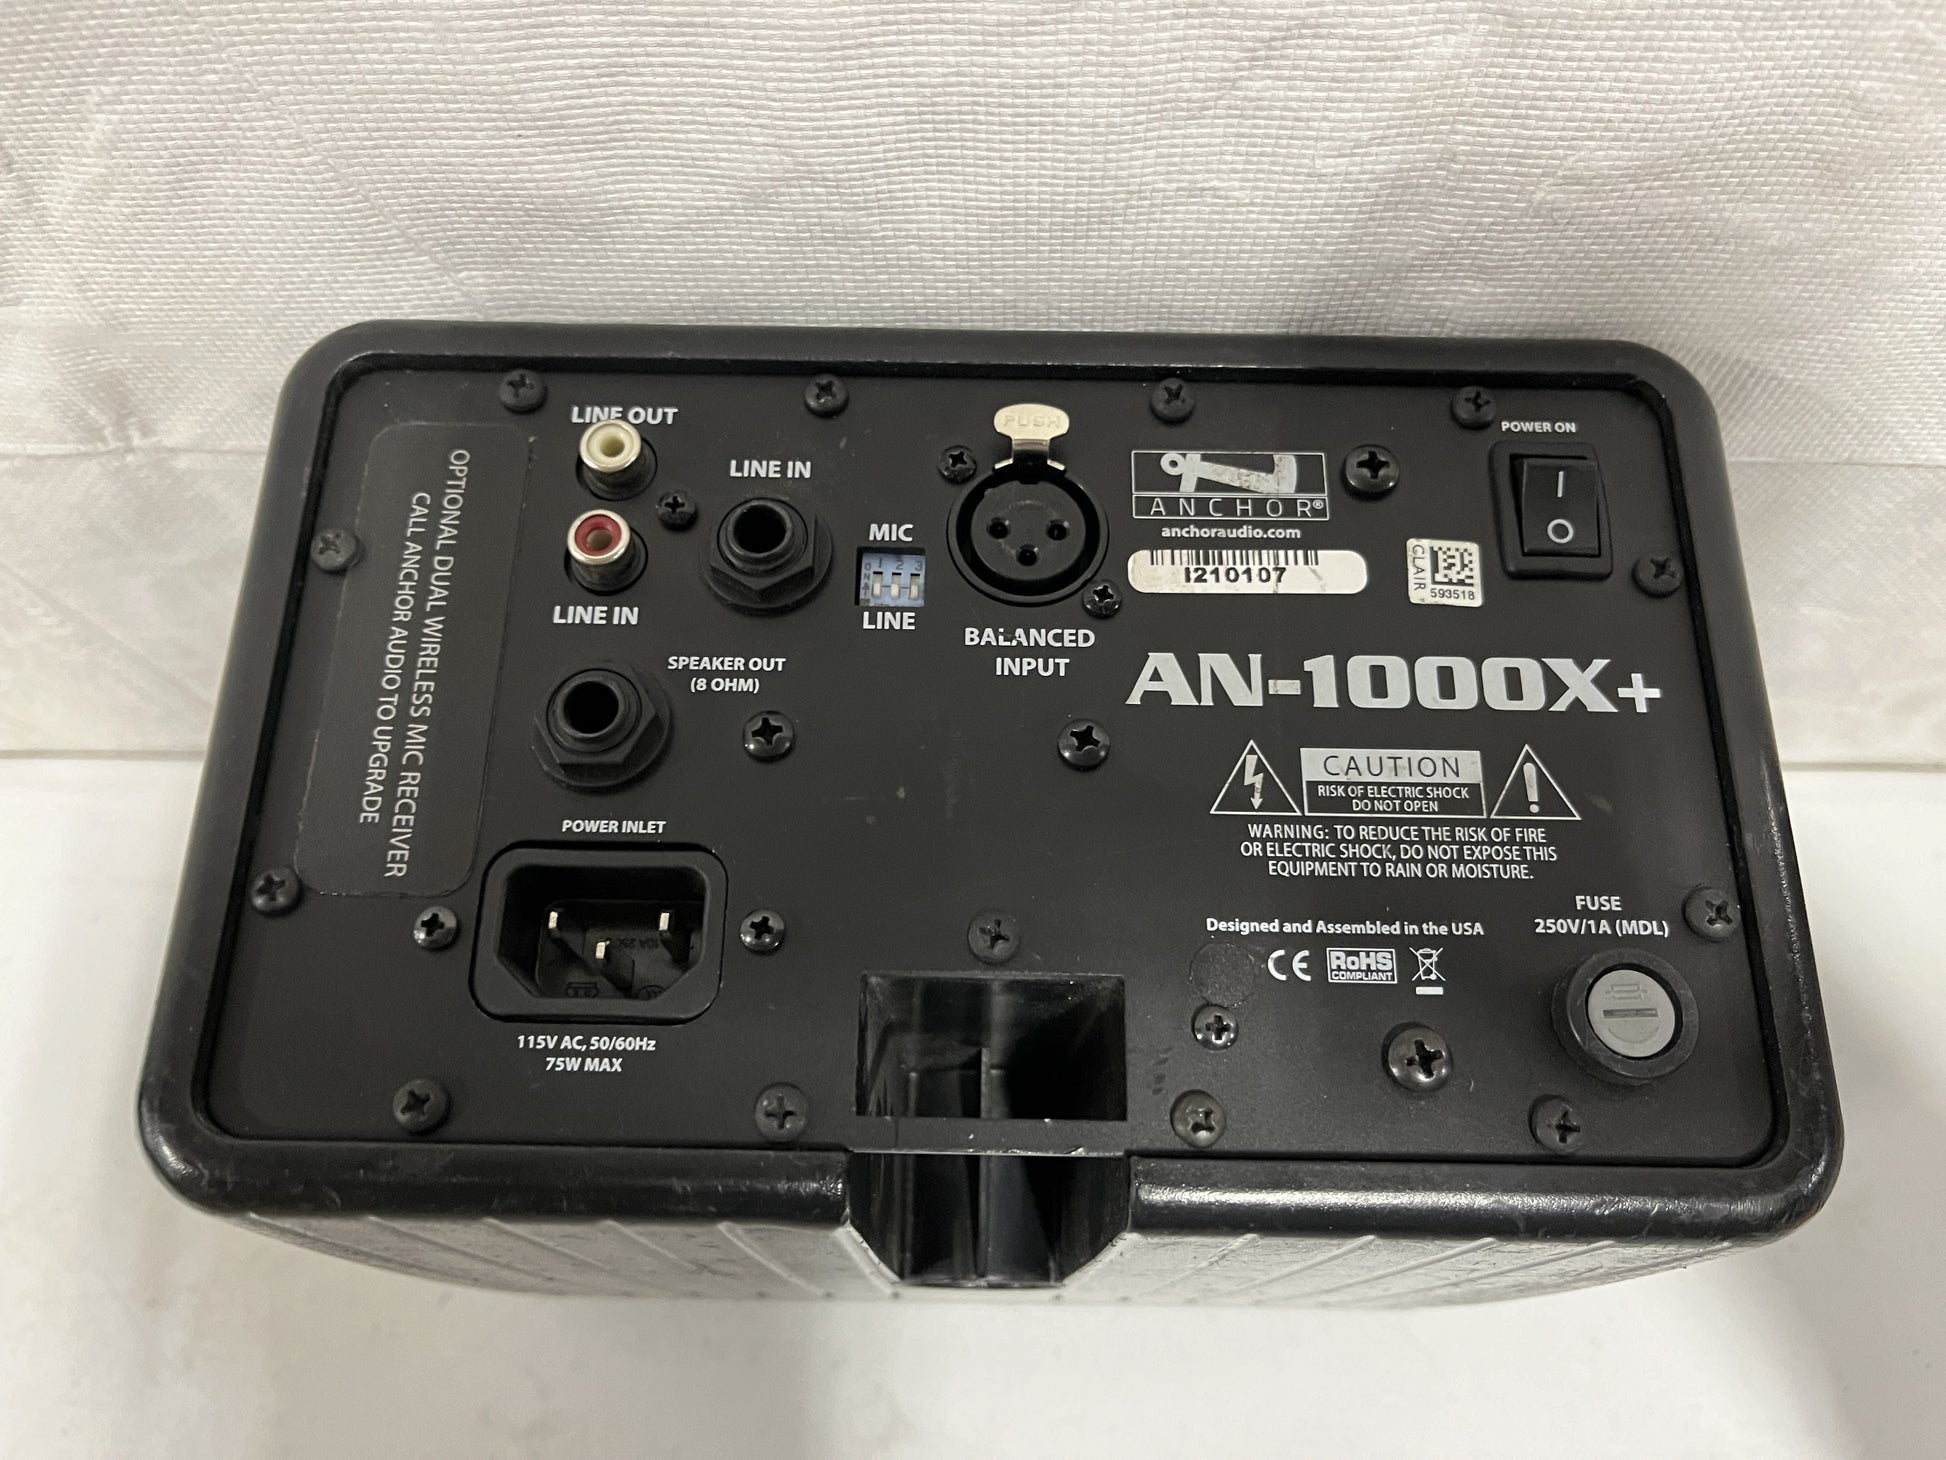 Anchor Audio AN-1000X+ Two Way Powered Monitor Portable Speaker. We Sell Professional Audio Equipment. Audio Systems, Amplifiers, Consoles, Mixers, Electronics, Entertainment, Sound, Live